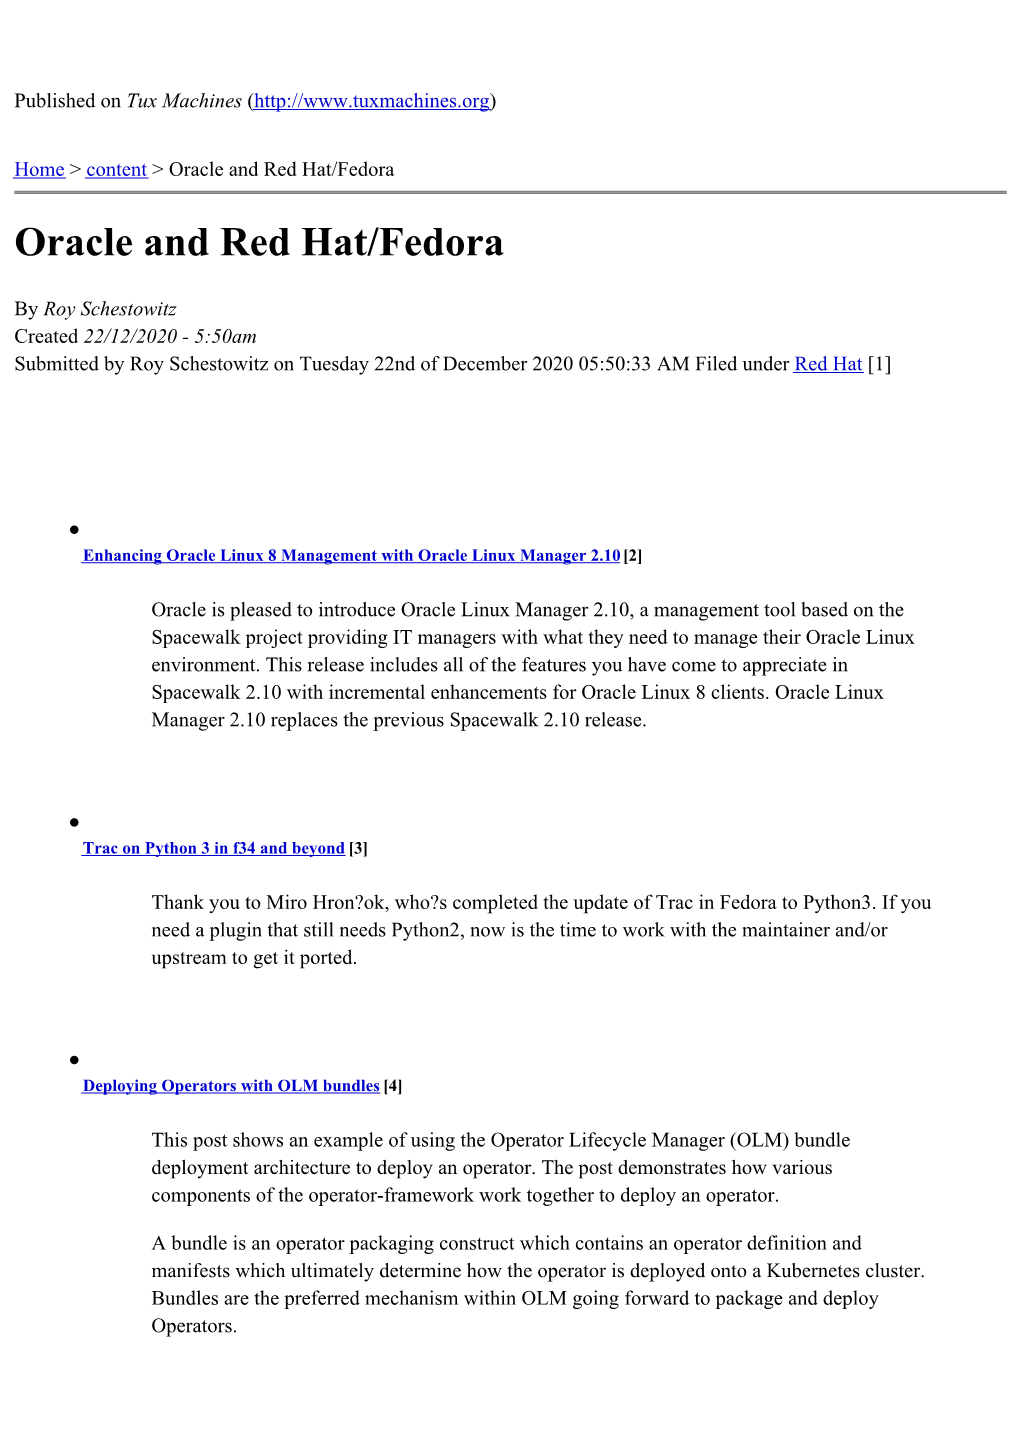 Oracle and Red Hat/Fedora